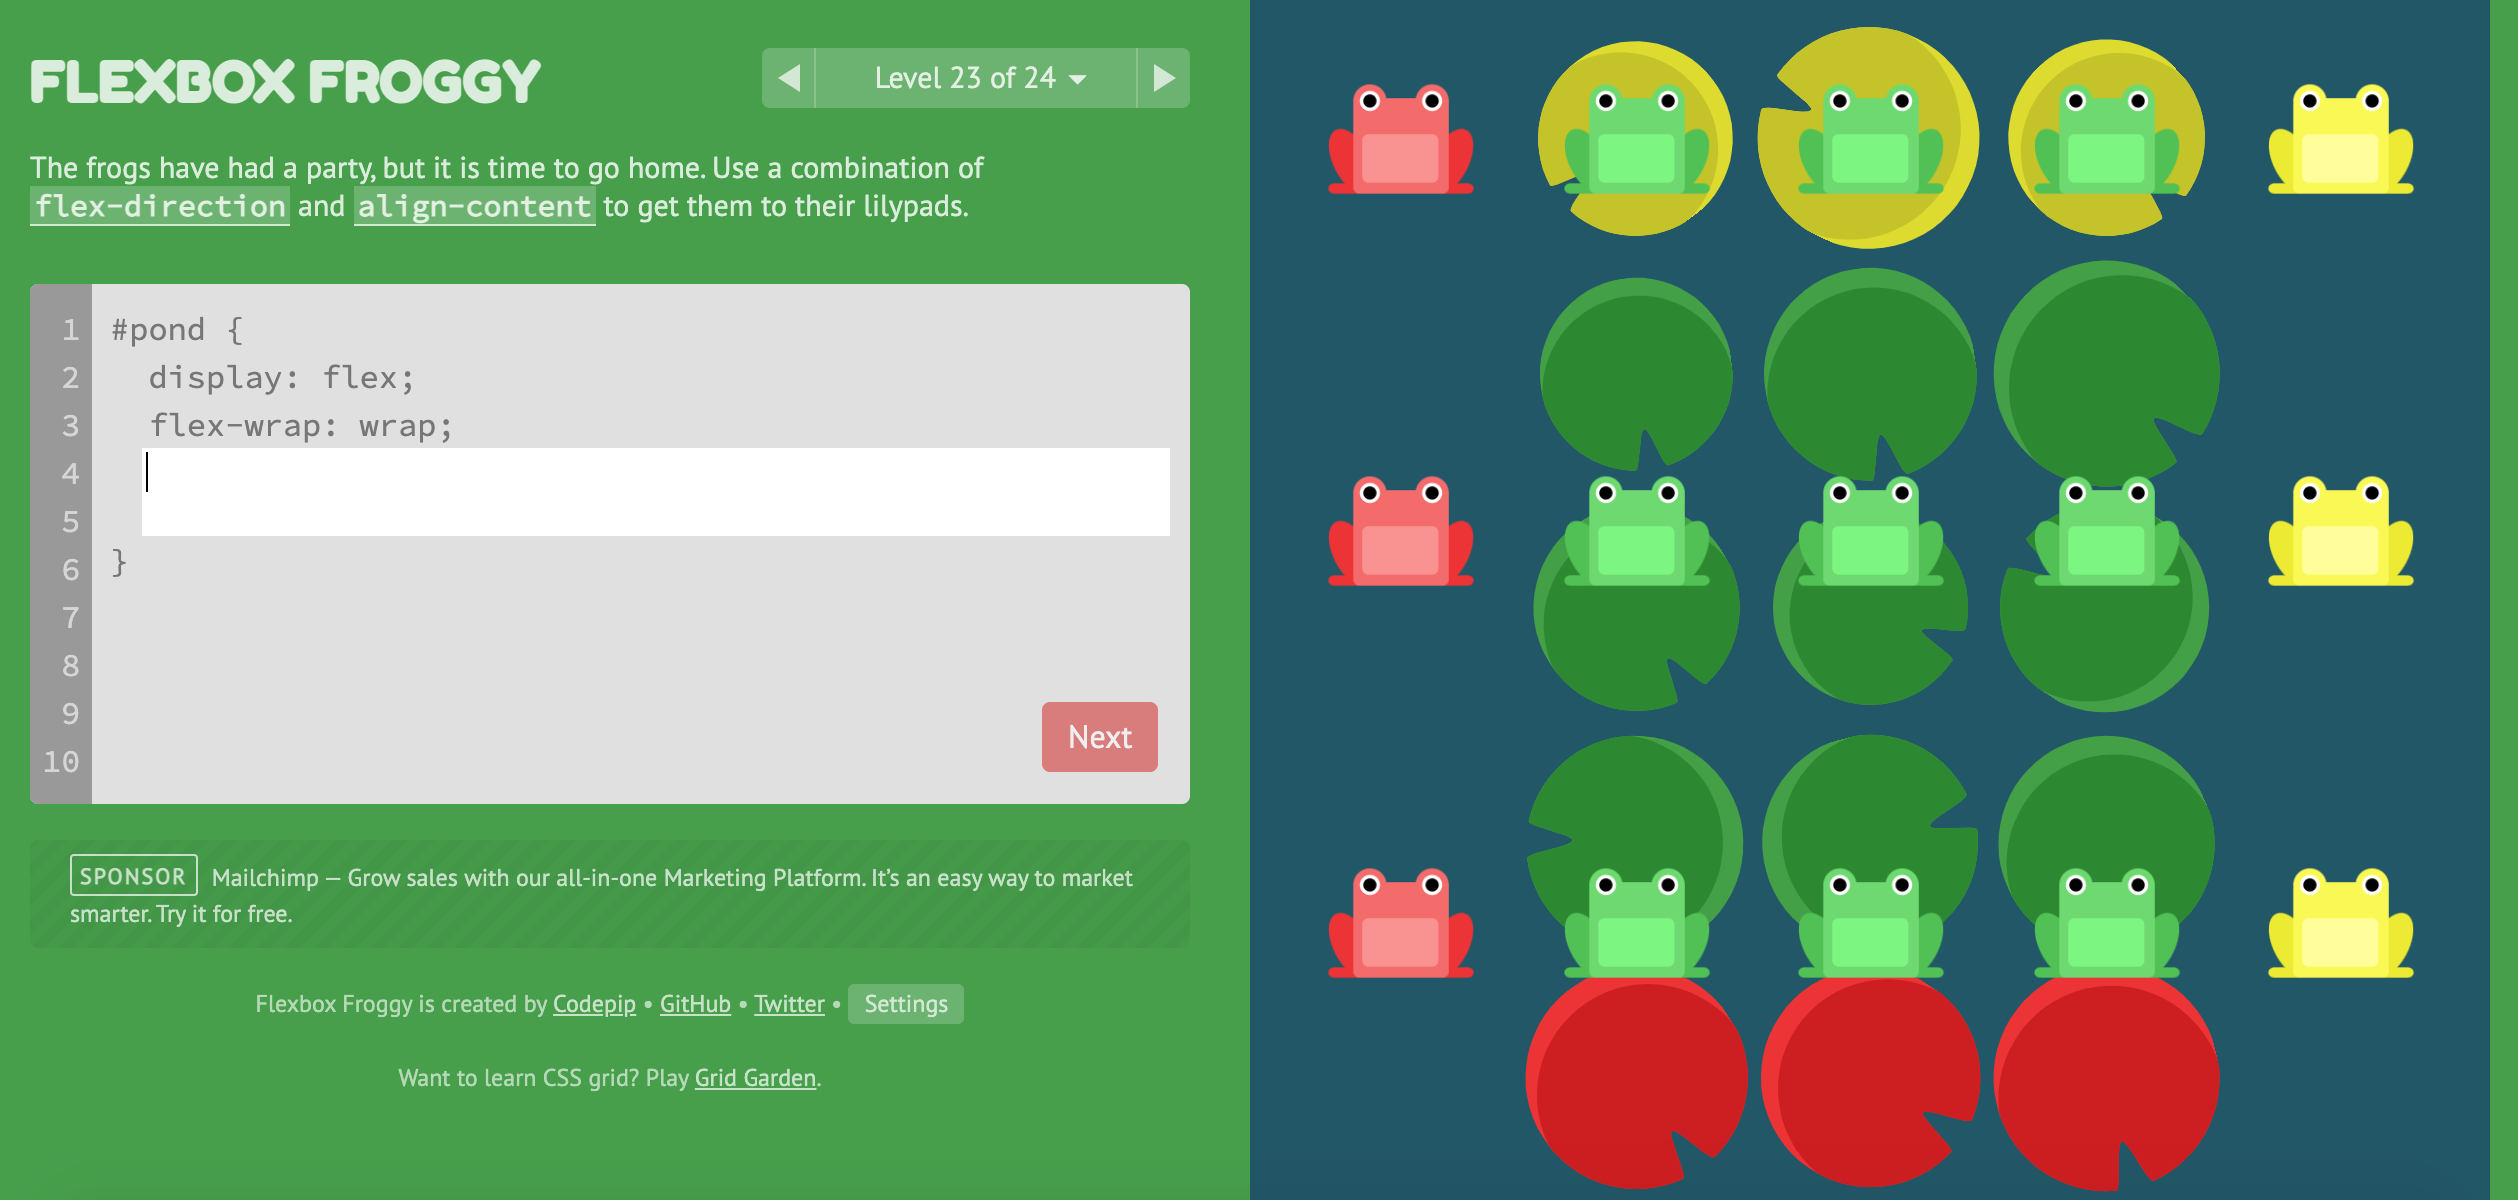 10 Free Coding Games for Kids - Create & Learn